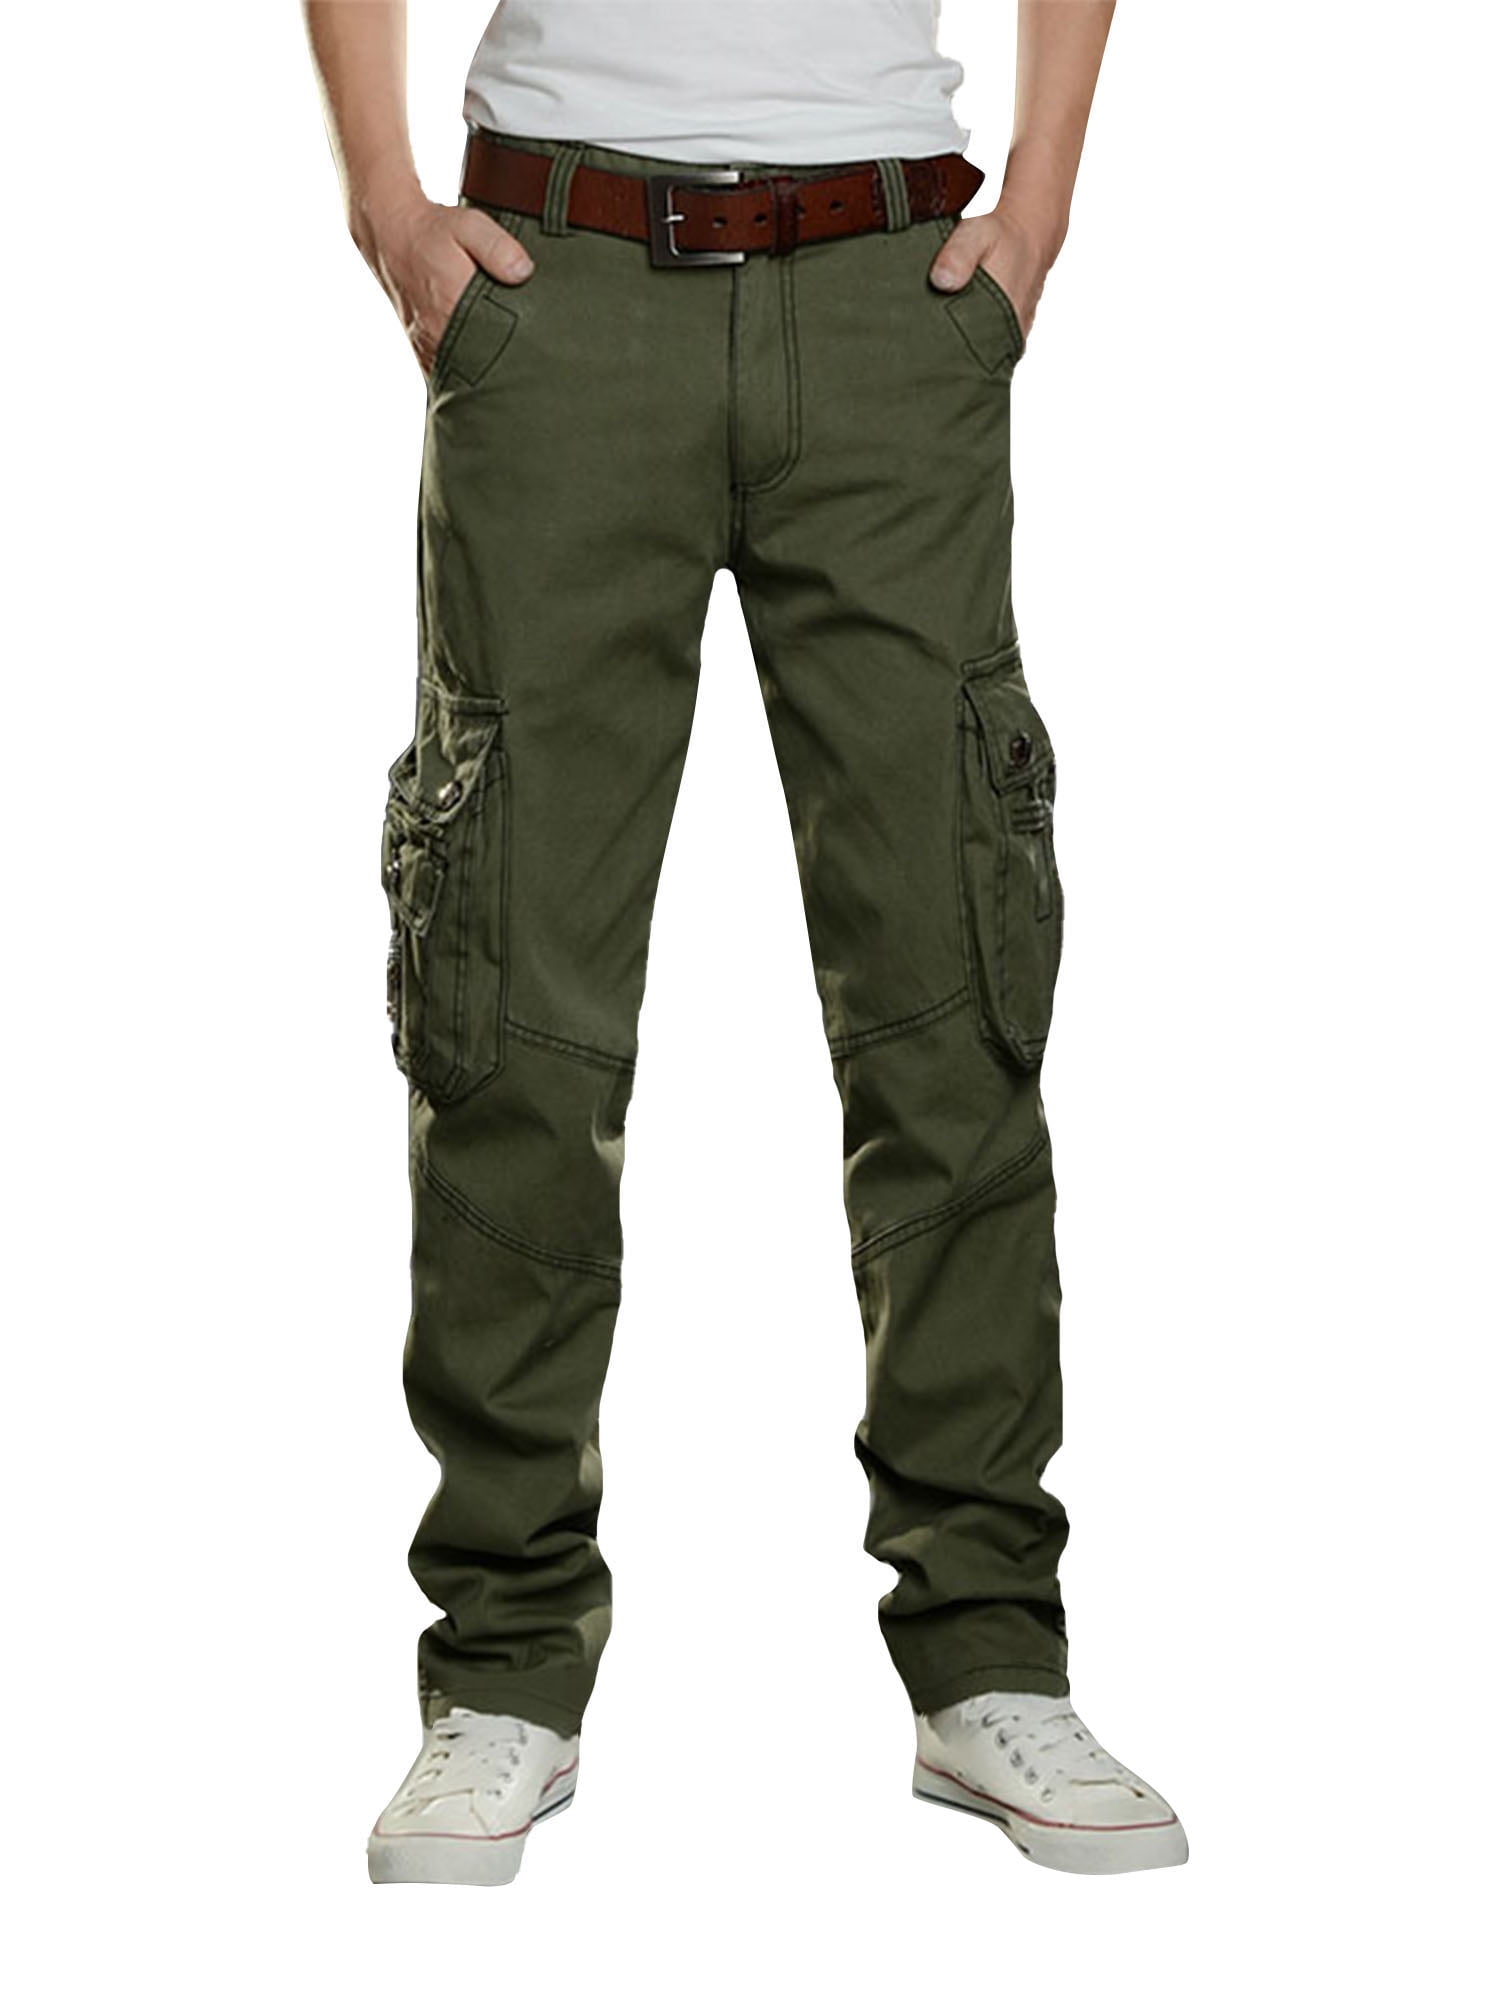 MAWCLOS Athletic Plus Size Cargo Pants for Men Relaxed Fit with ...